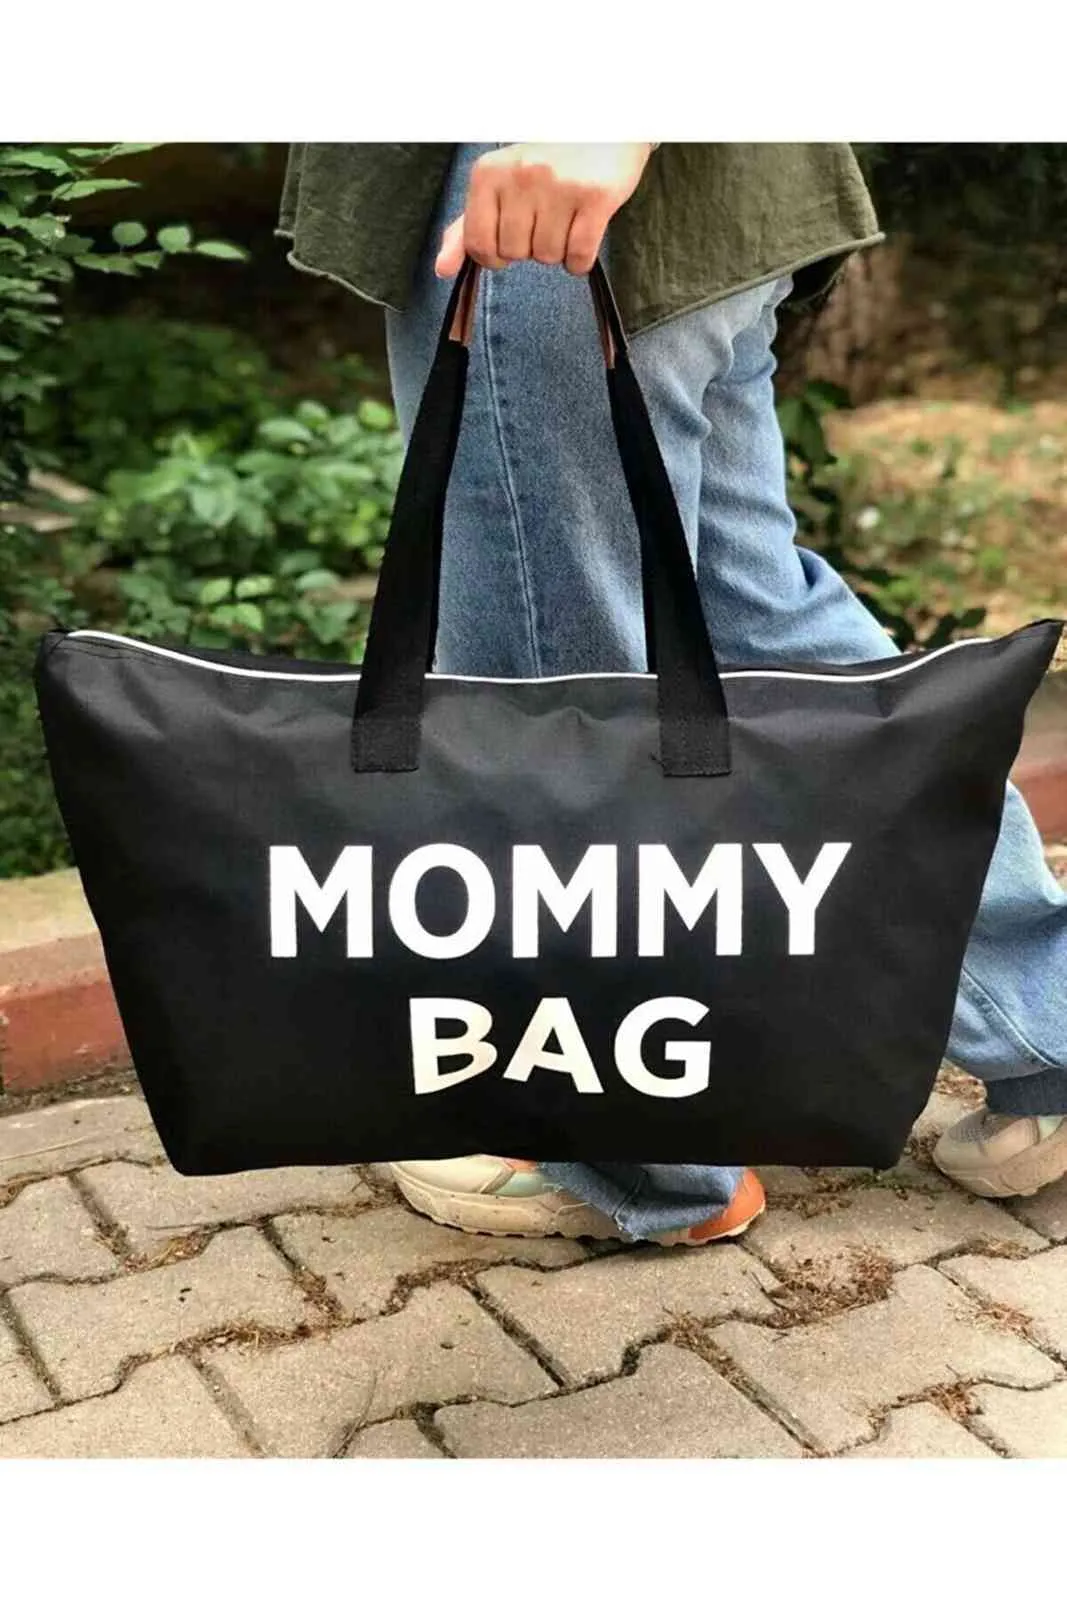 2021 Baby Tote Bag For Mothers Nappy Maternity Diaper Mommy Bag Storage Organizer Changing Carriage Baby Care Travel Backpack H1110